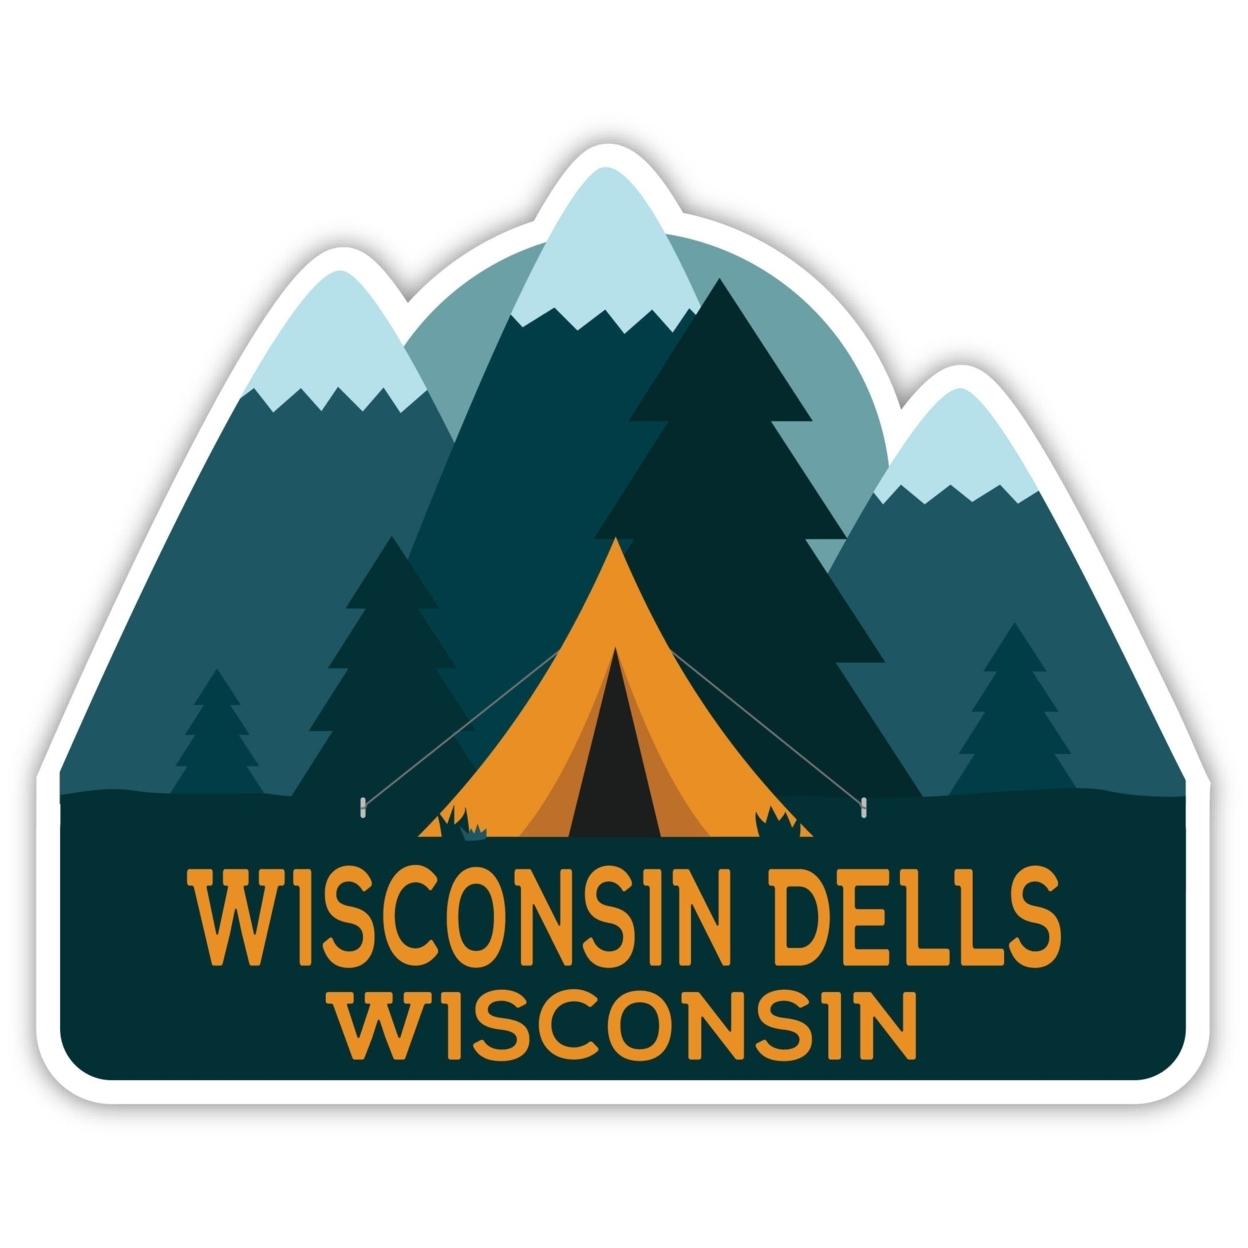 Wisconsin Dells Wisconsin Souvenir Decorative Stickers (Choose Theme And Size) - Single Unit, 2-Inch, Tent